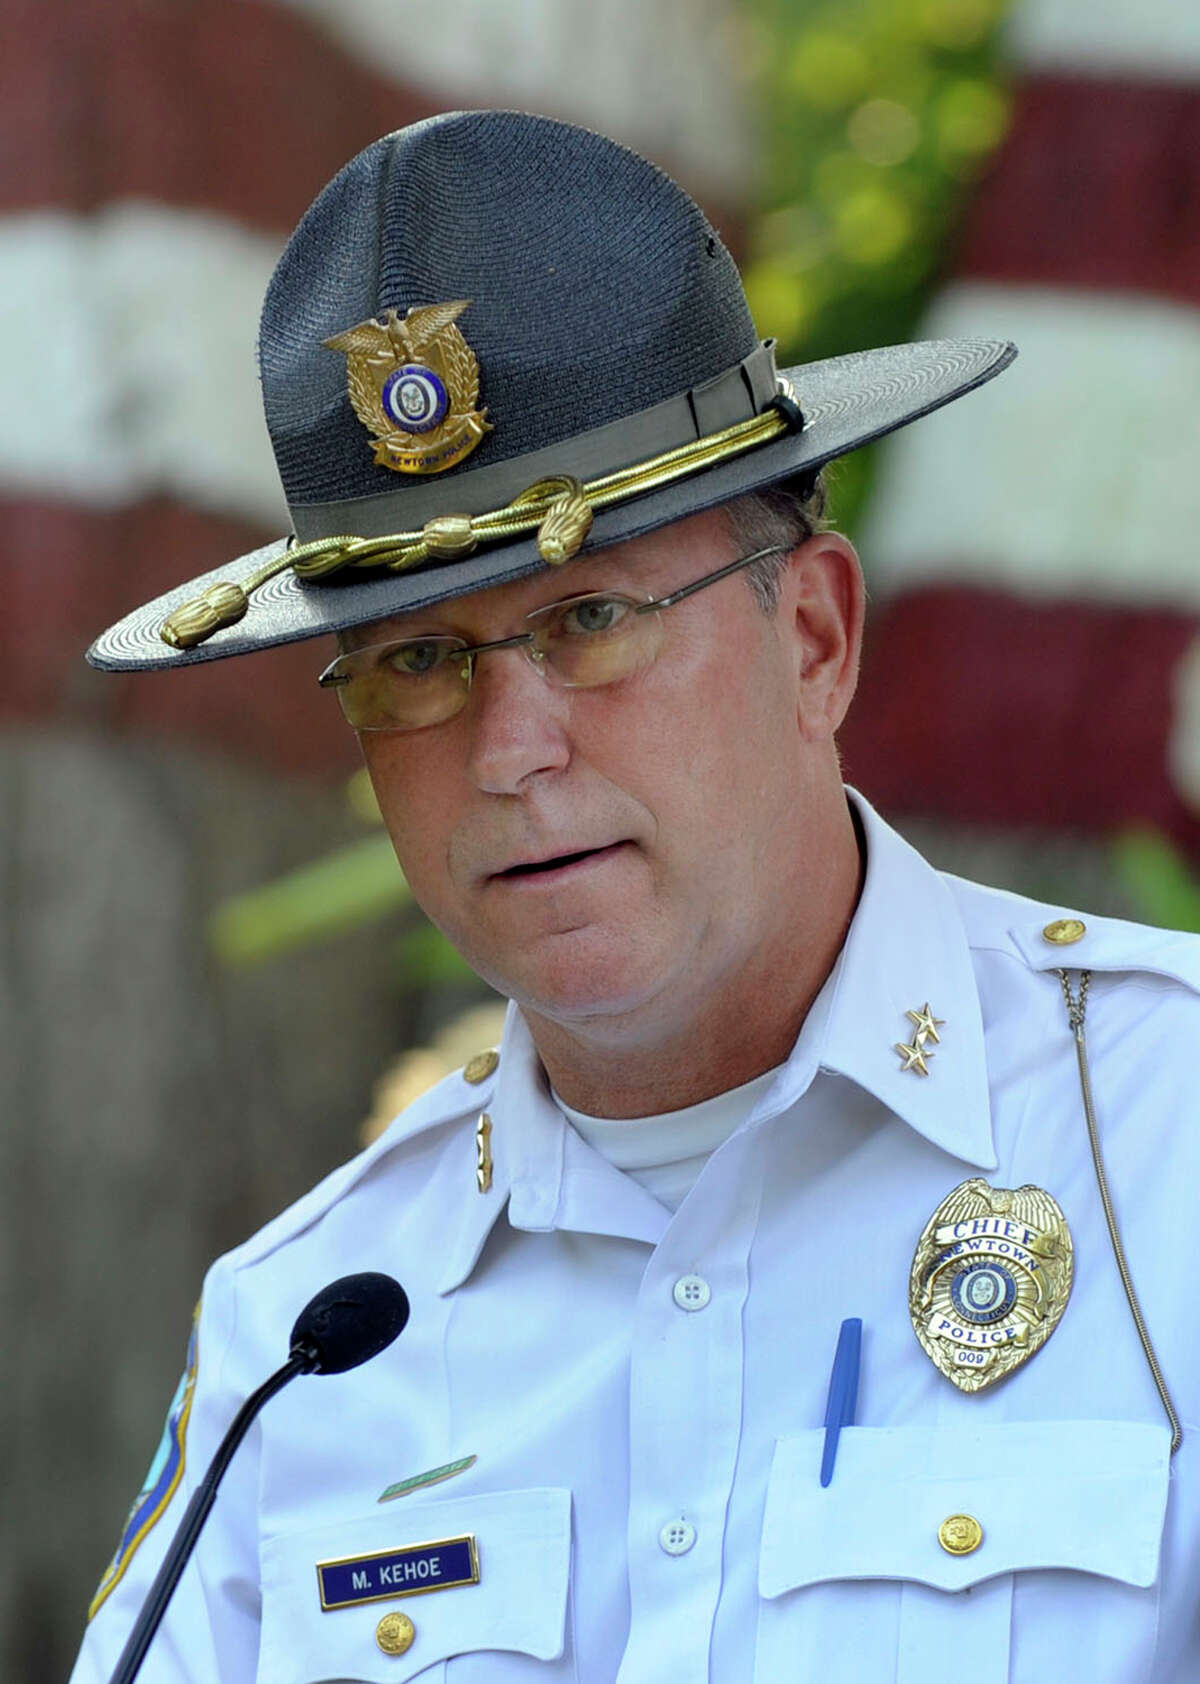 Newtown Police Chief Michael Kehoe